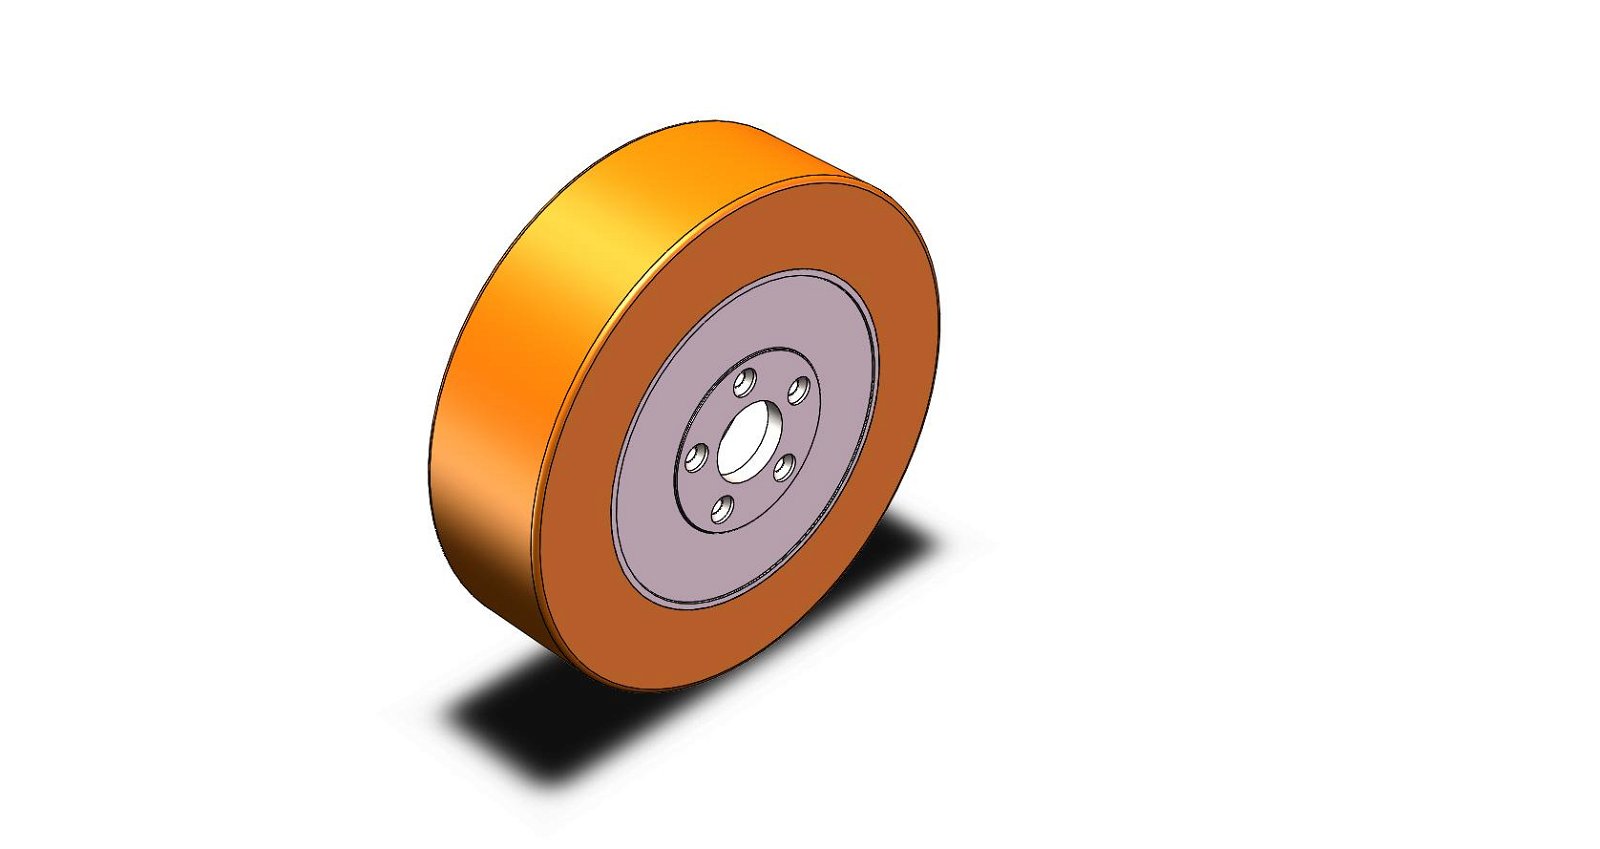 200x50mm robot drive wheel for AGV high quality OEM ODM available 5